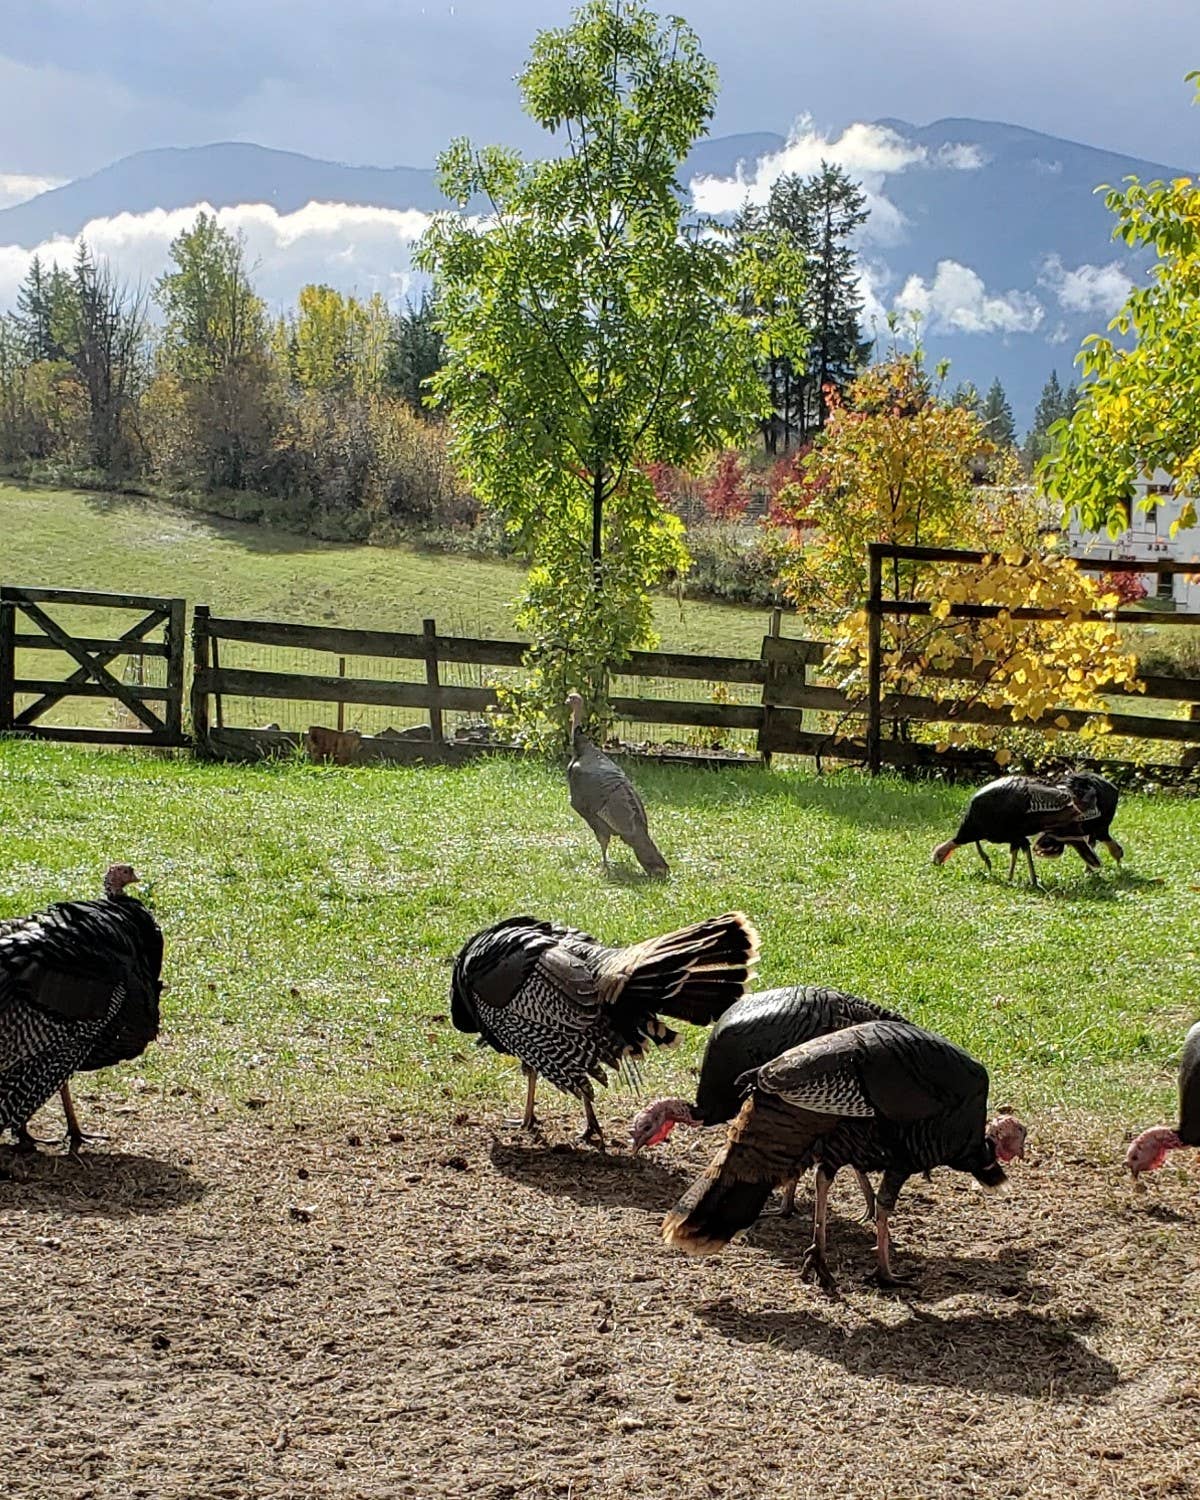 A Canadian Wine Pro on What To Drink With The Turkey, Inspired By Her Own From-The-Land Feast